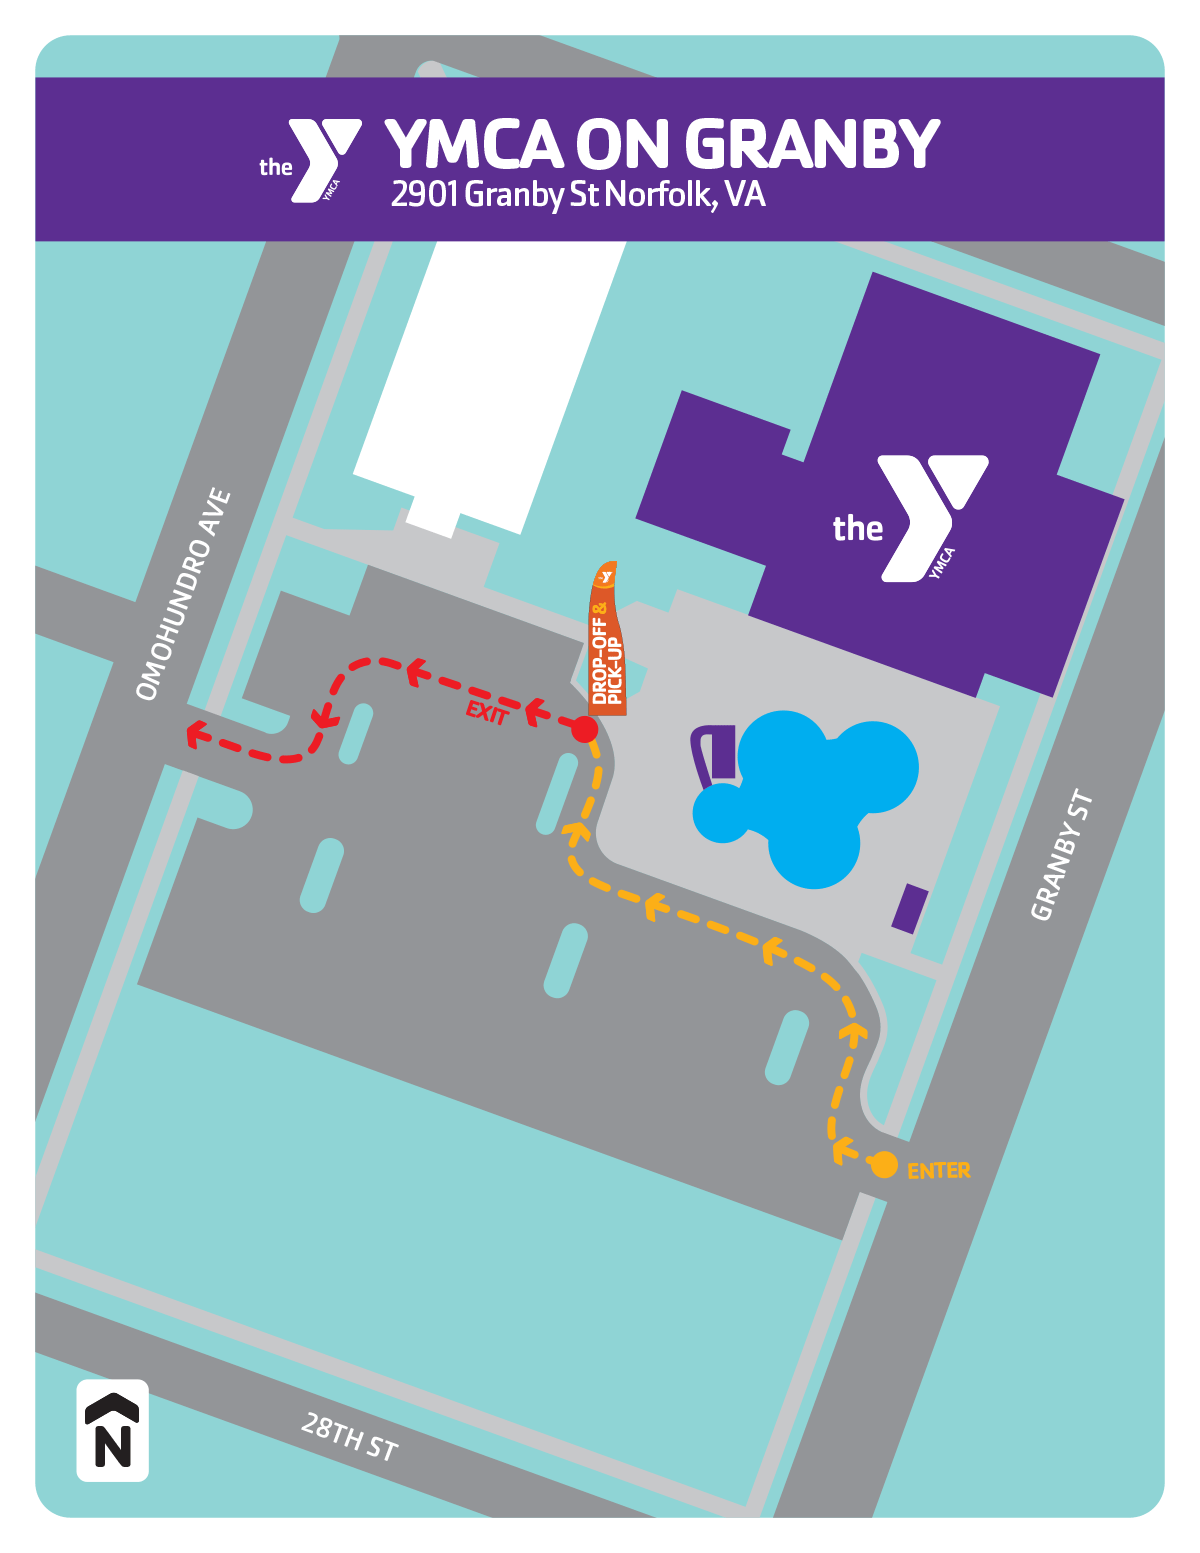 Summer camp drop-off & pick-up locations for the YMCA on Granby